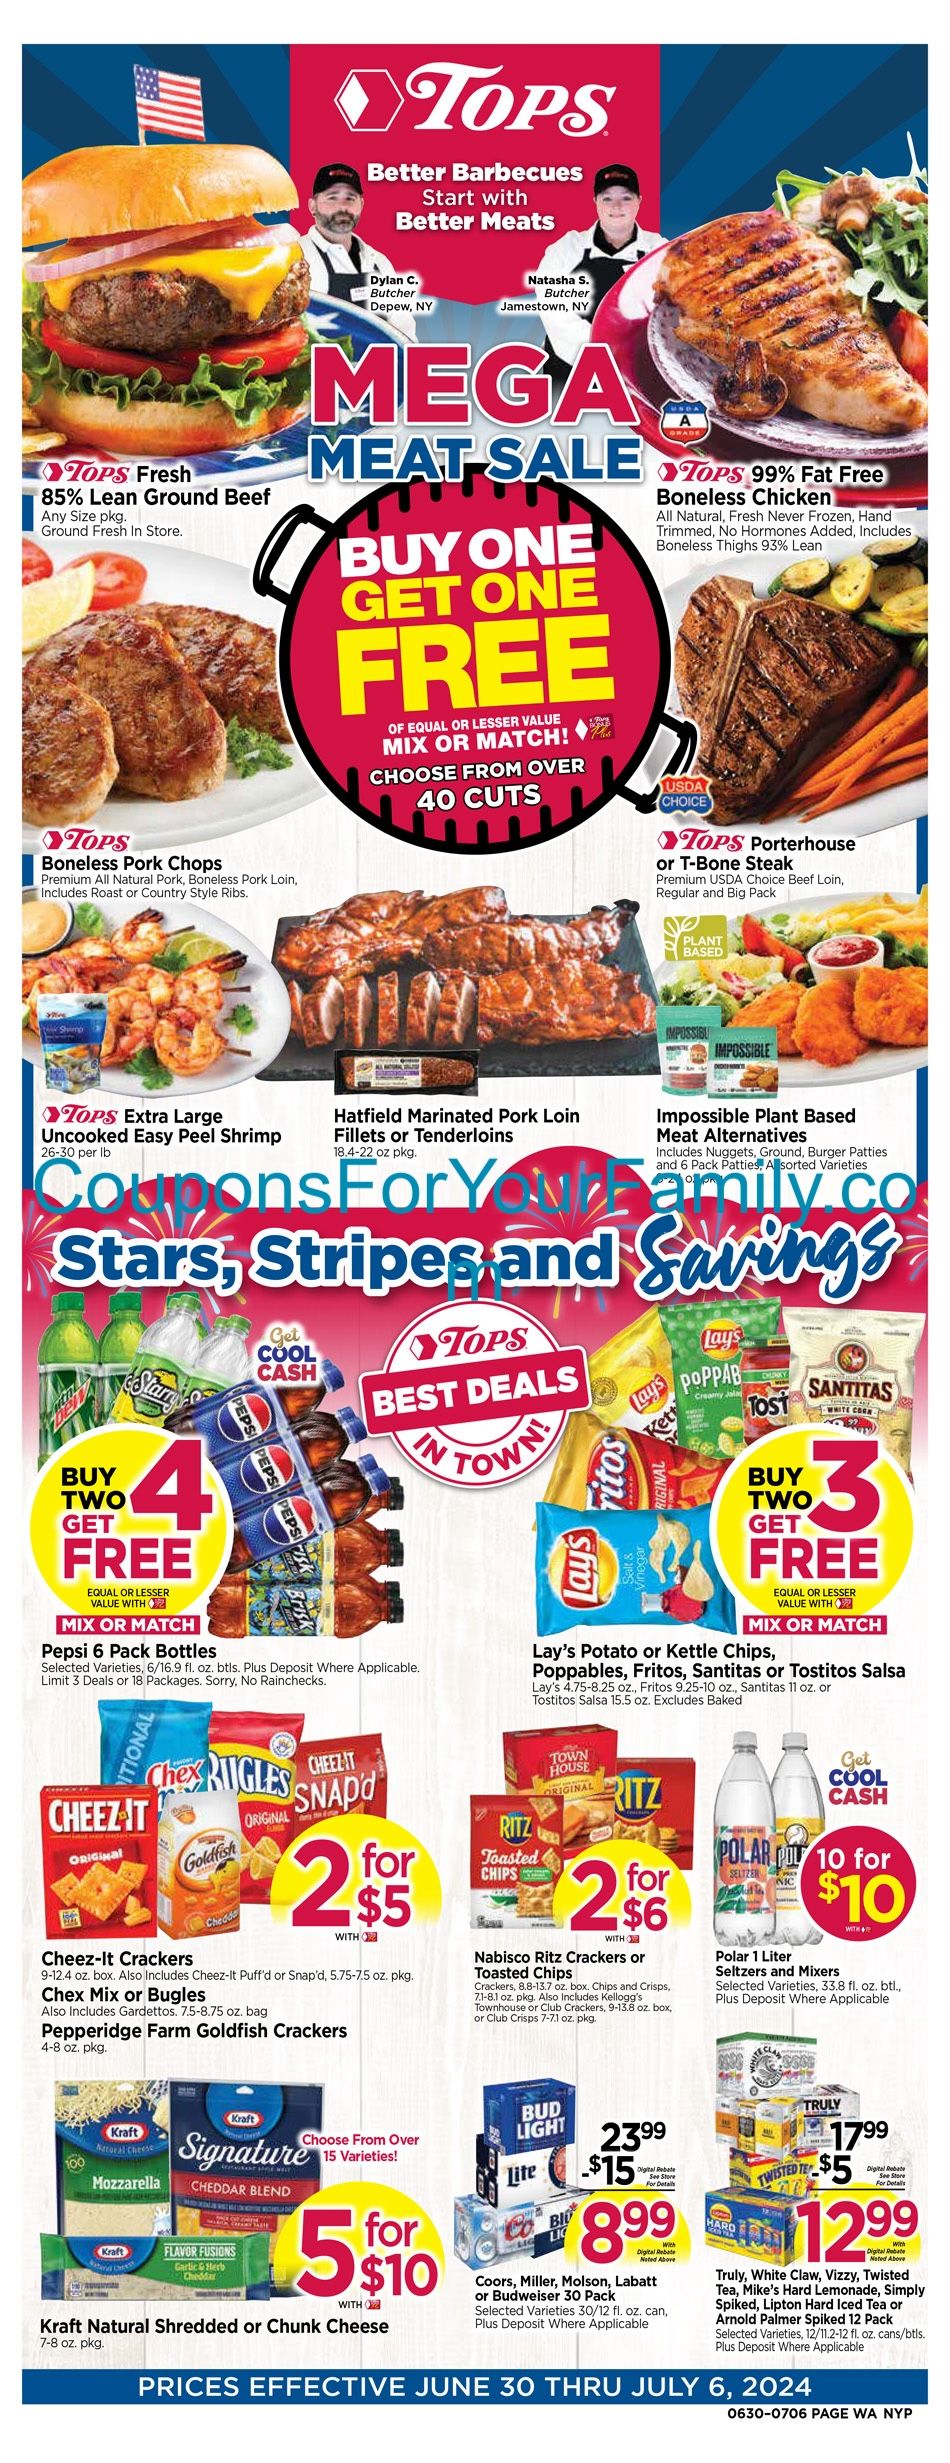 Tops Weekly Ad 6_23_24 pg 1